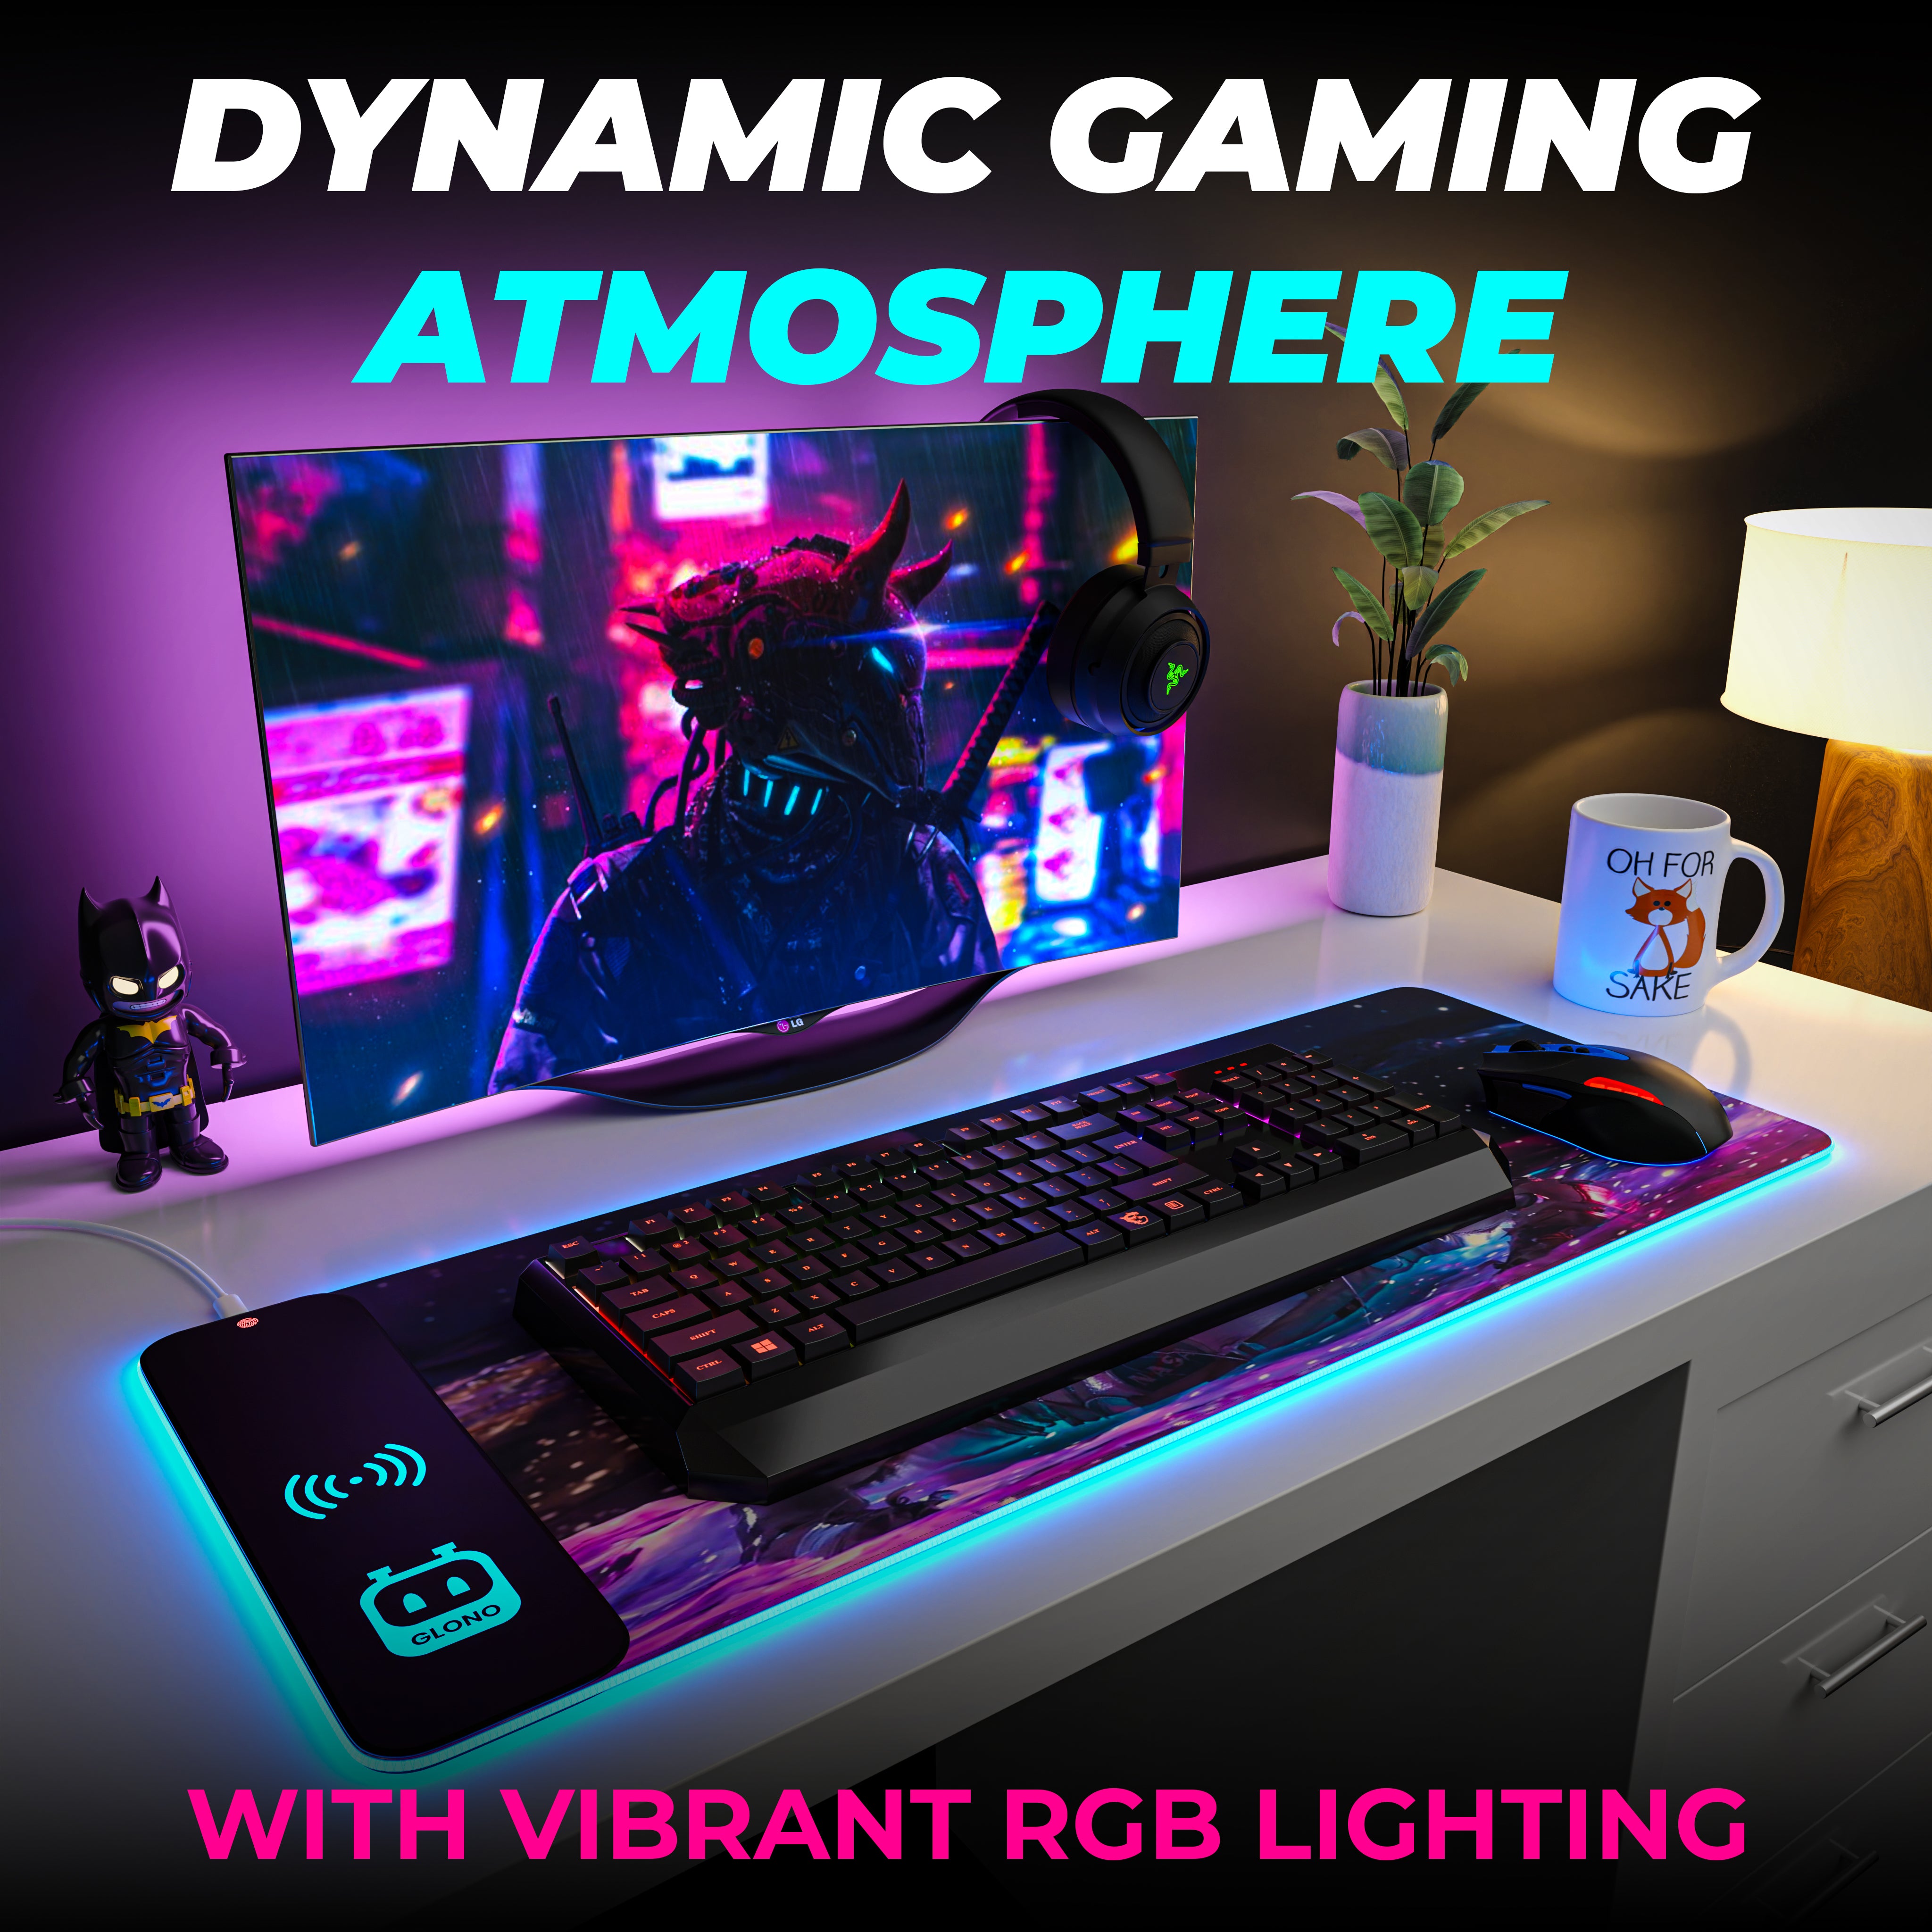 Illumicharge 2-in-1 RGB Mouse Pad with 15W Wireless Charger | Ambient Lighting | The Spacewalk Theme